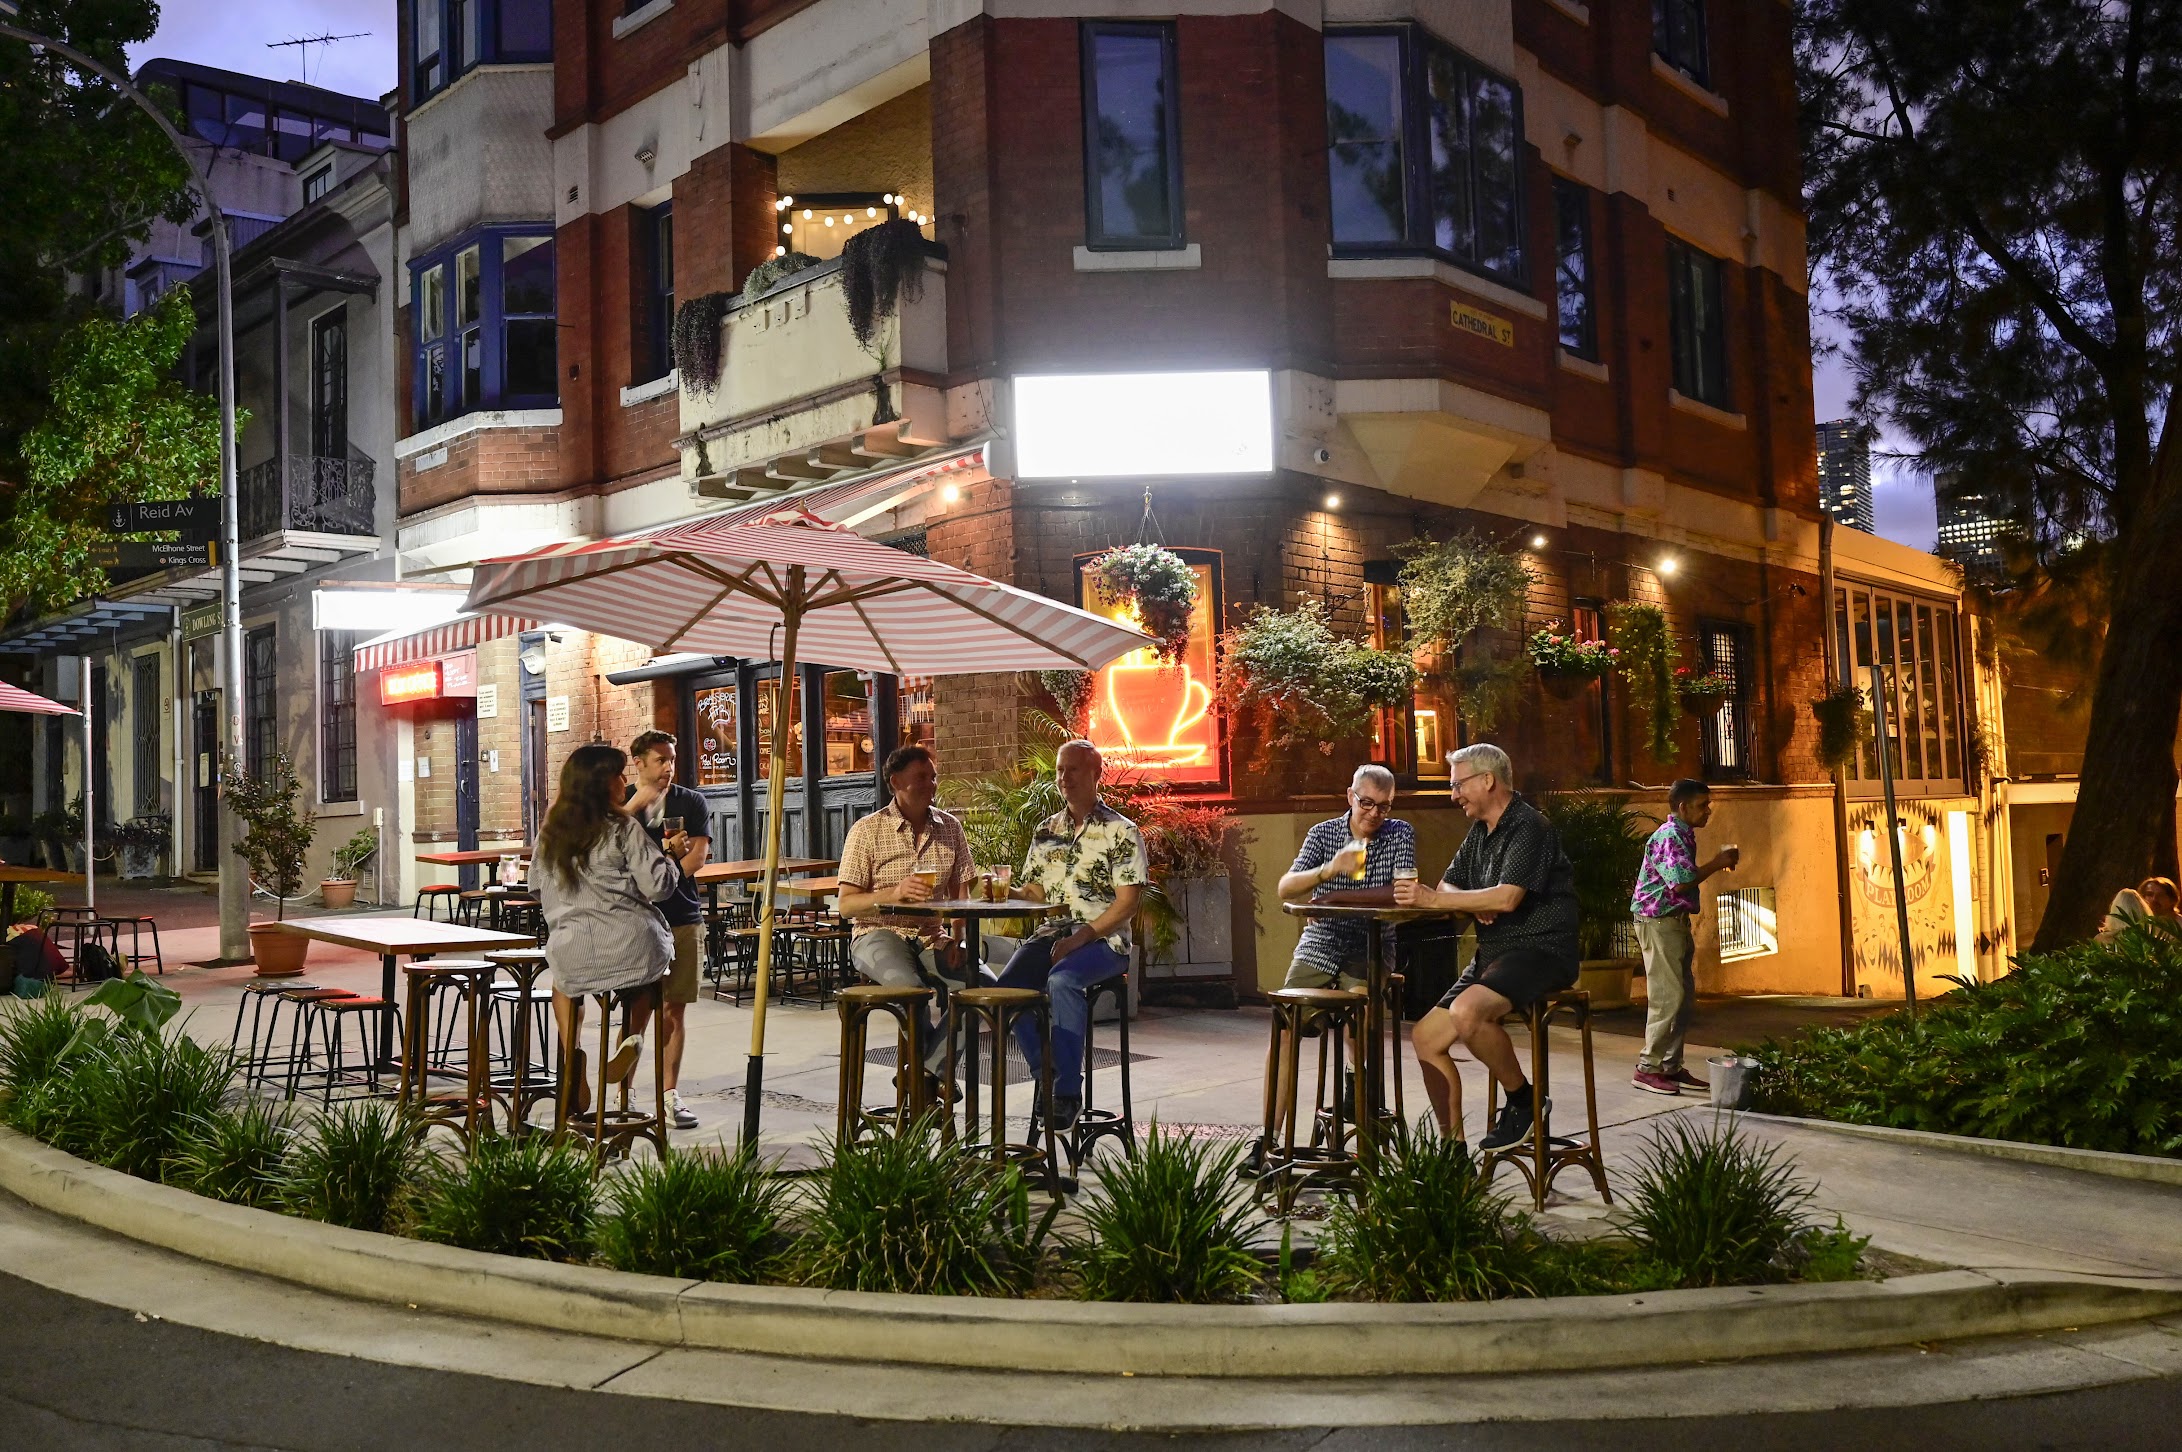 Free outdoor dining permits could be extended into 2025